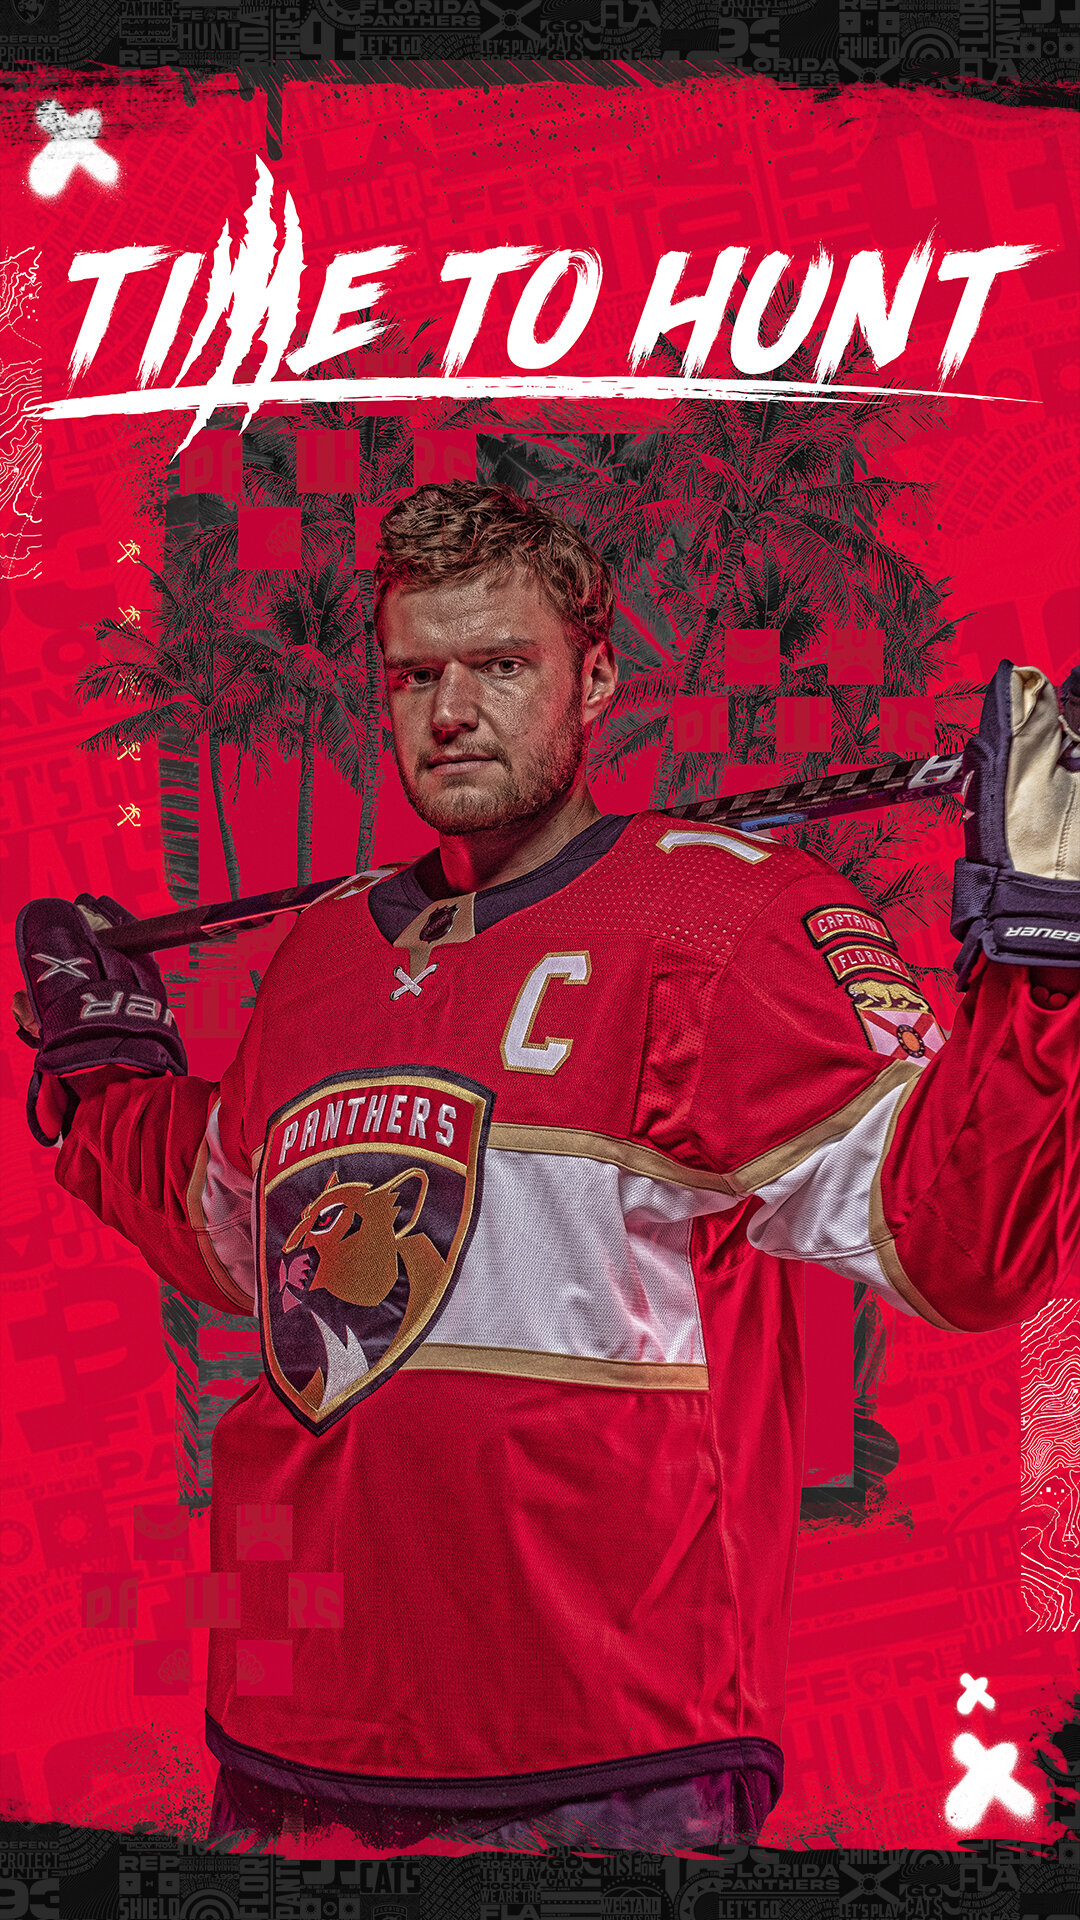 Red_Time_To_Hunt_RedLook_9x16_Barkov.jpg